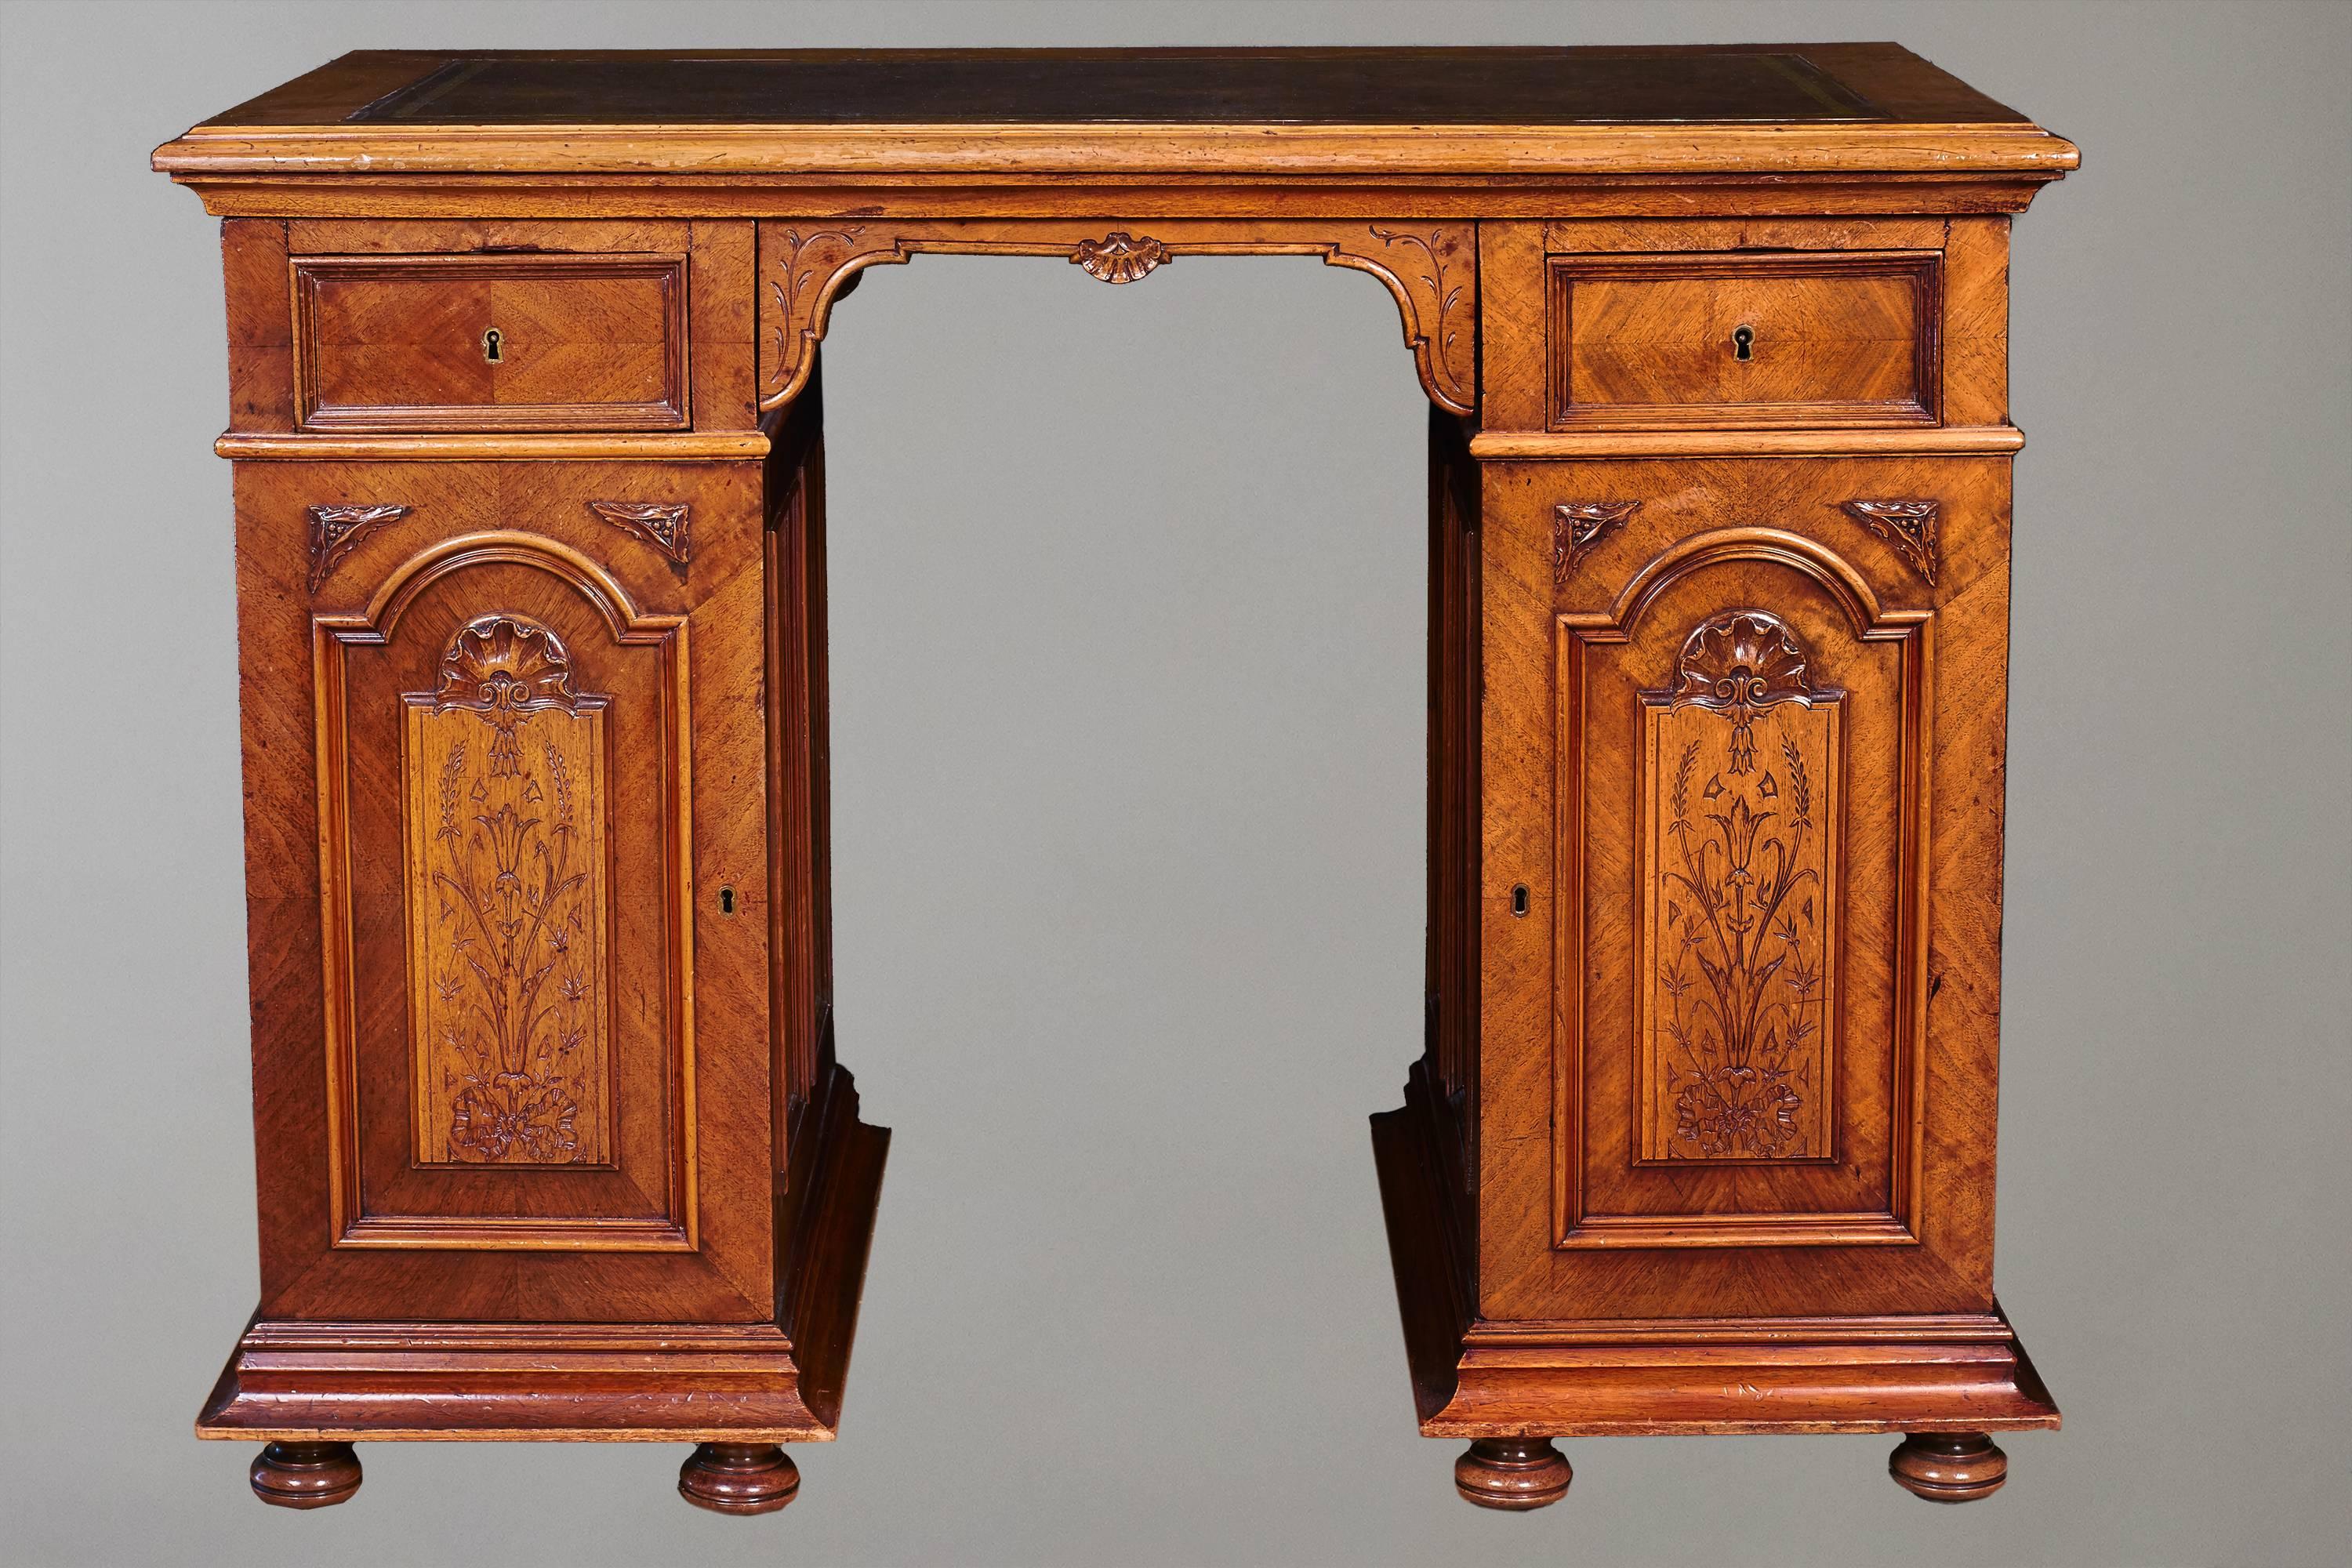 An unusual compact English walnut pedestal desk, the leather-lined top above two frieze drawers over two shell carved and incised paneled doors, the sides and back paneled as well, supported on compressed bun feet.